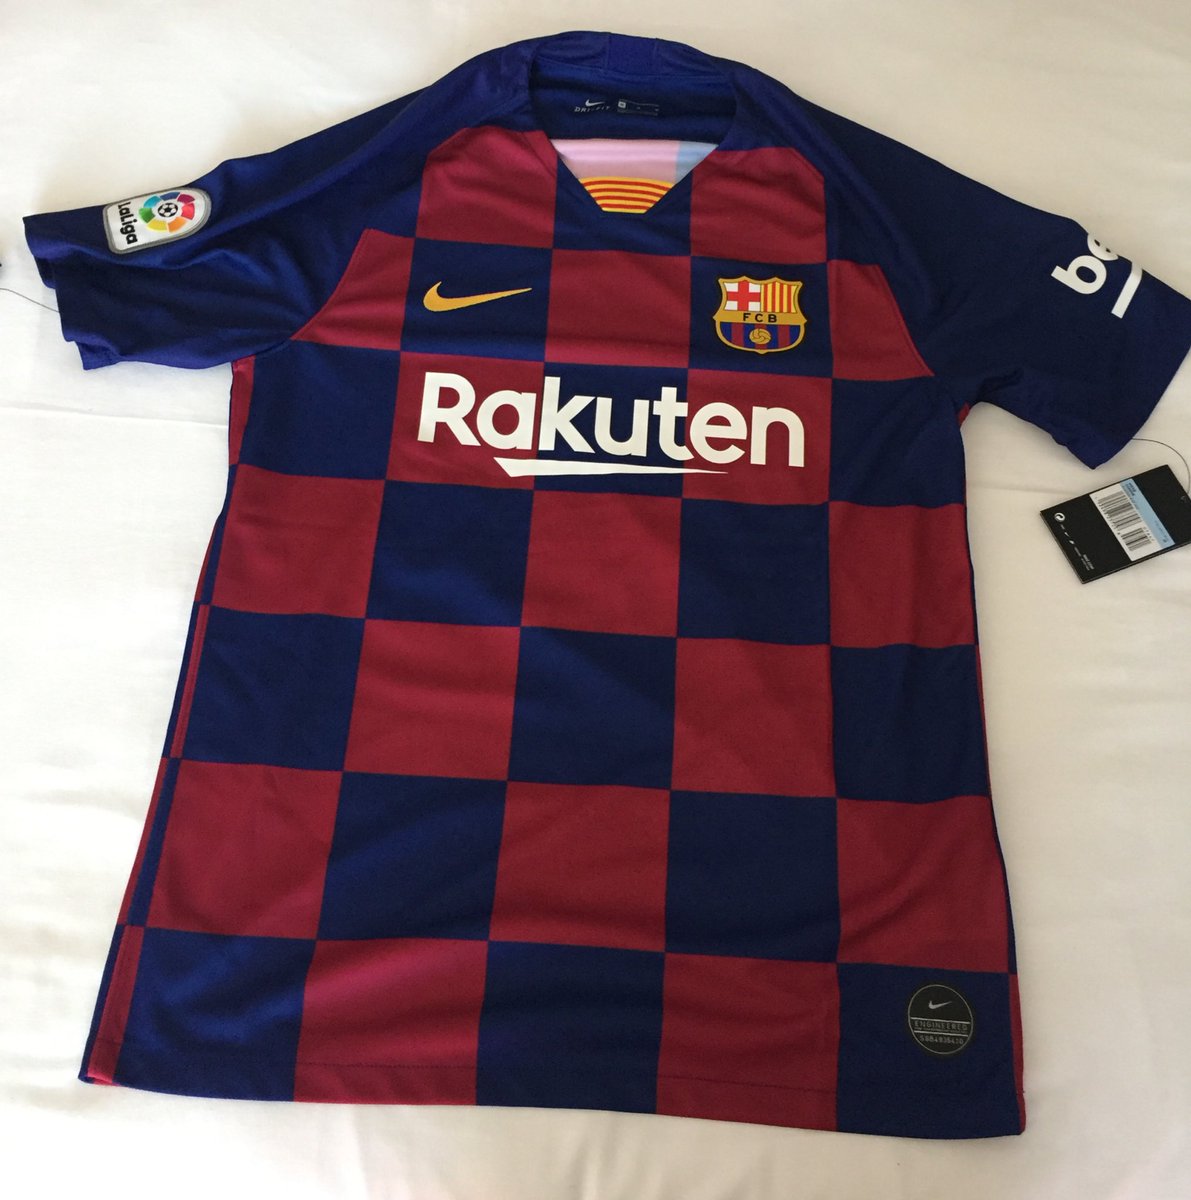 barcelona jersey with my name